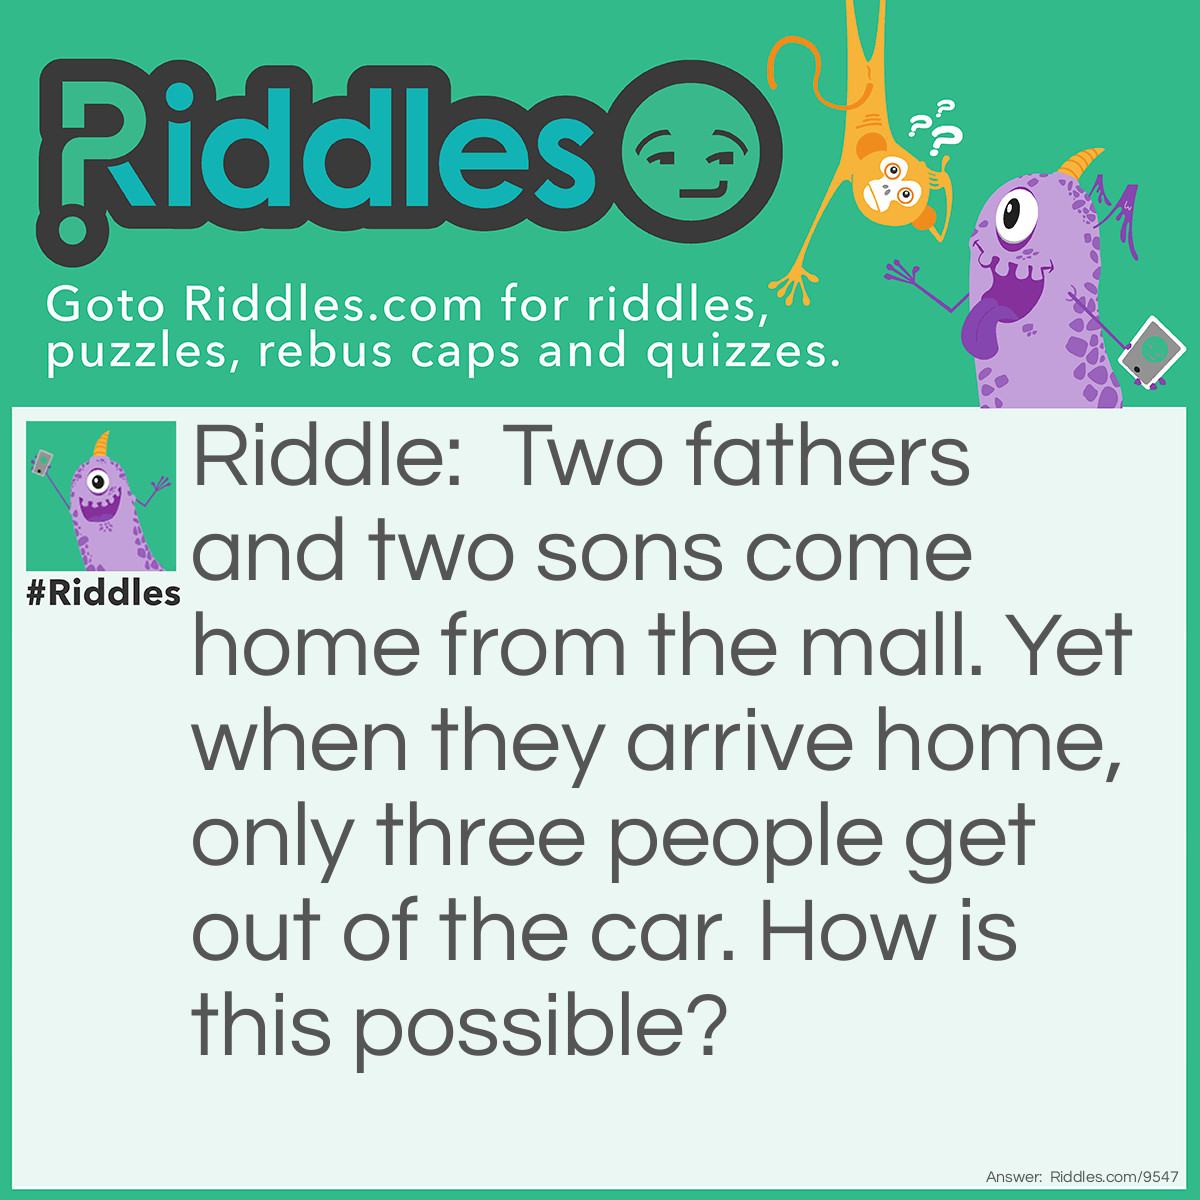 Riddle: Two fathers and two sons come home from the mall. Yet when they arrive home, only three people get out of the car. How is this possible? Answer: They are a grandfather, father, and son.